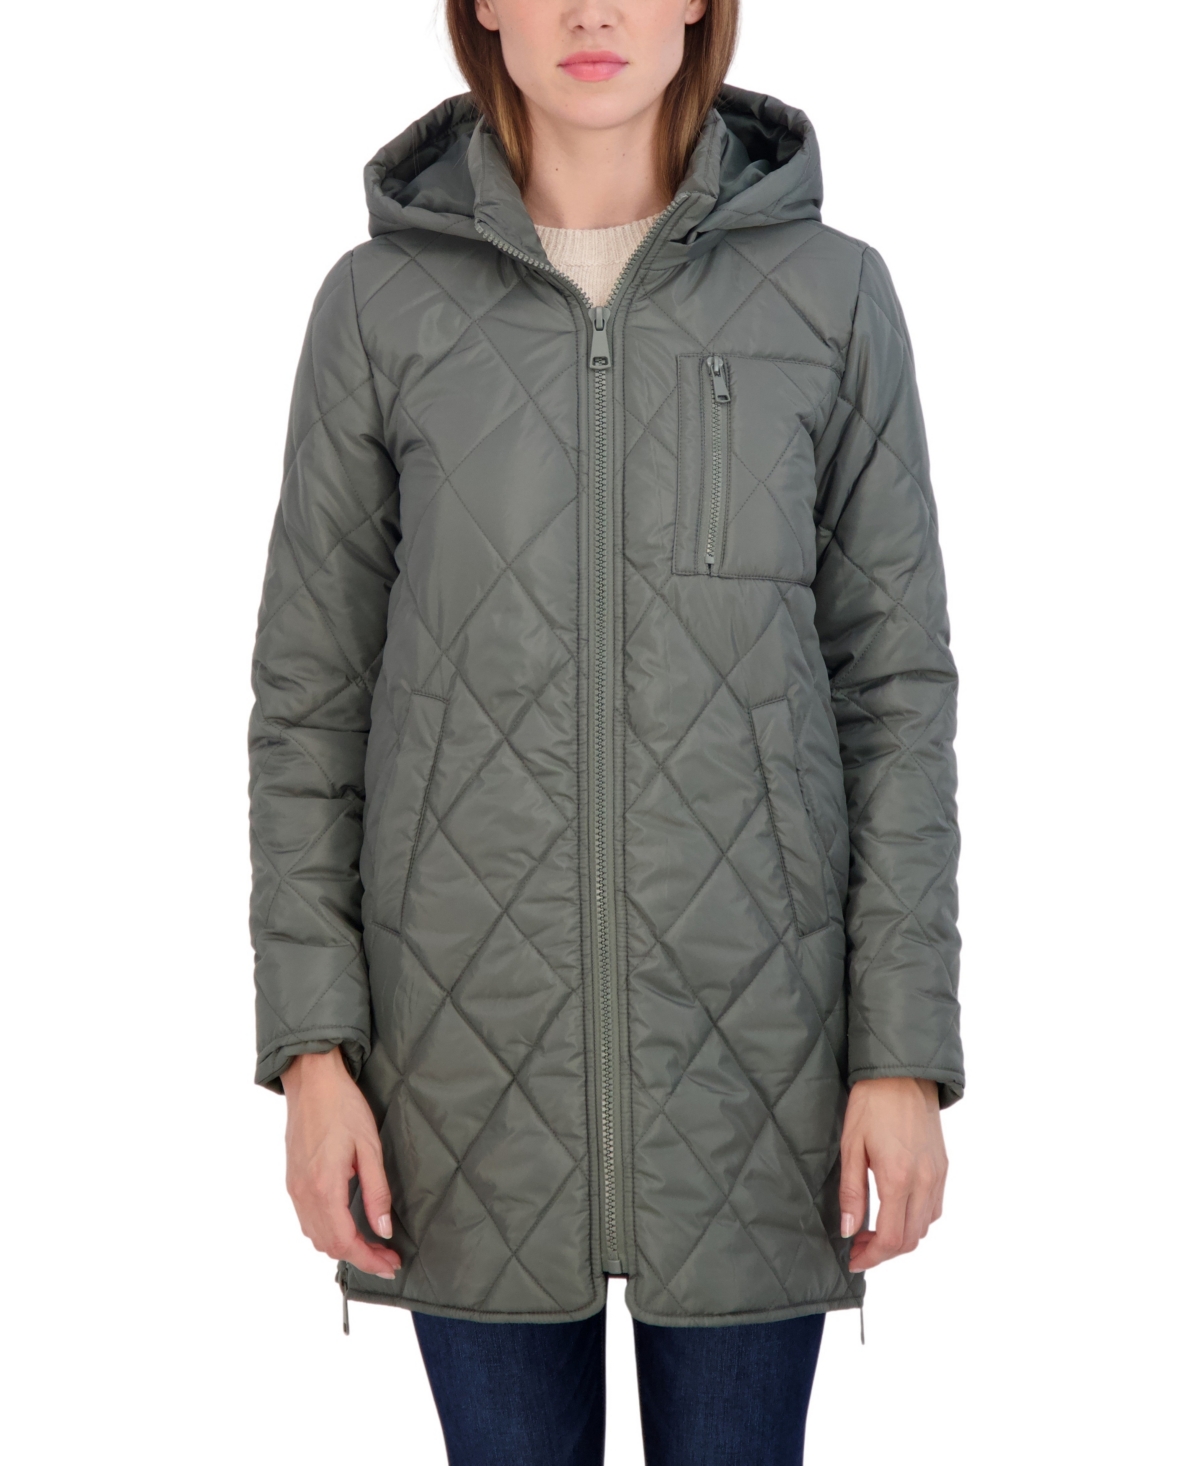 Women's Sebby Junior's 3/4 Quilted Jacket with Hood - Sage